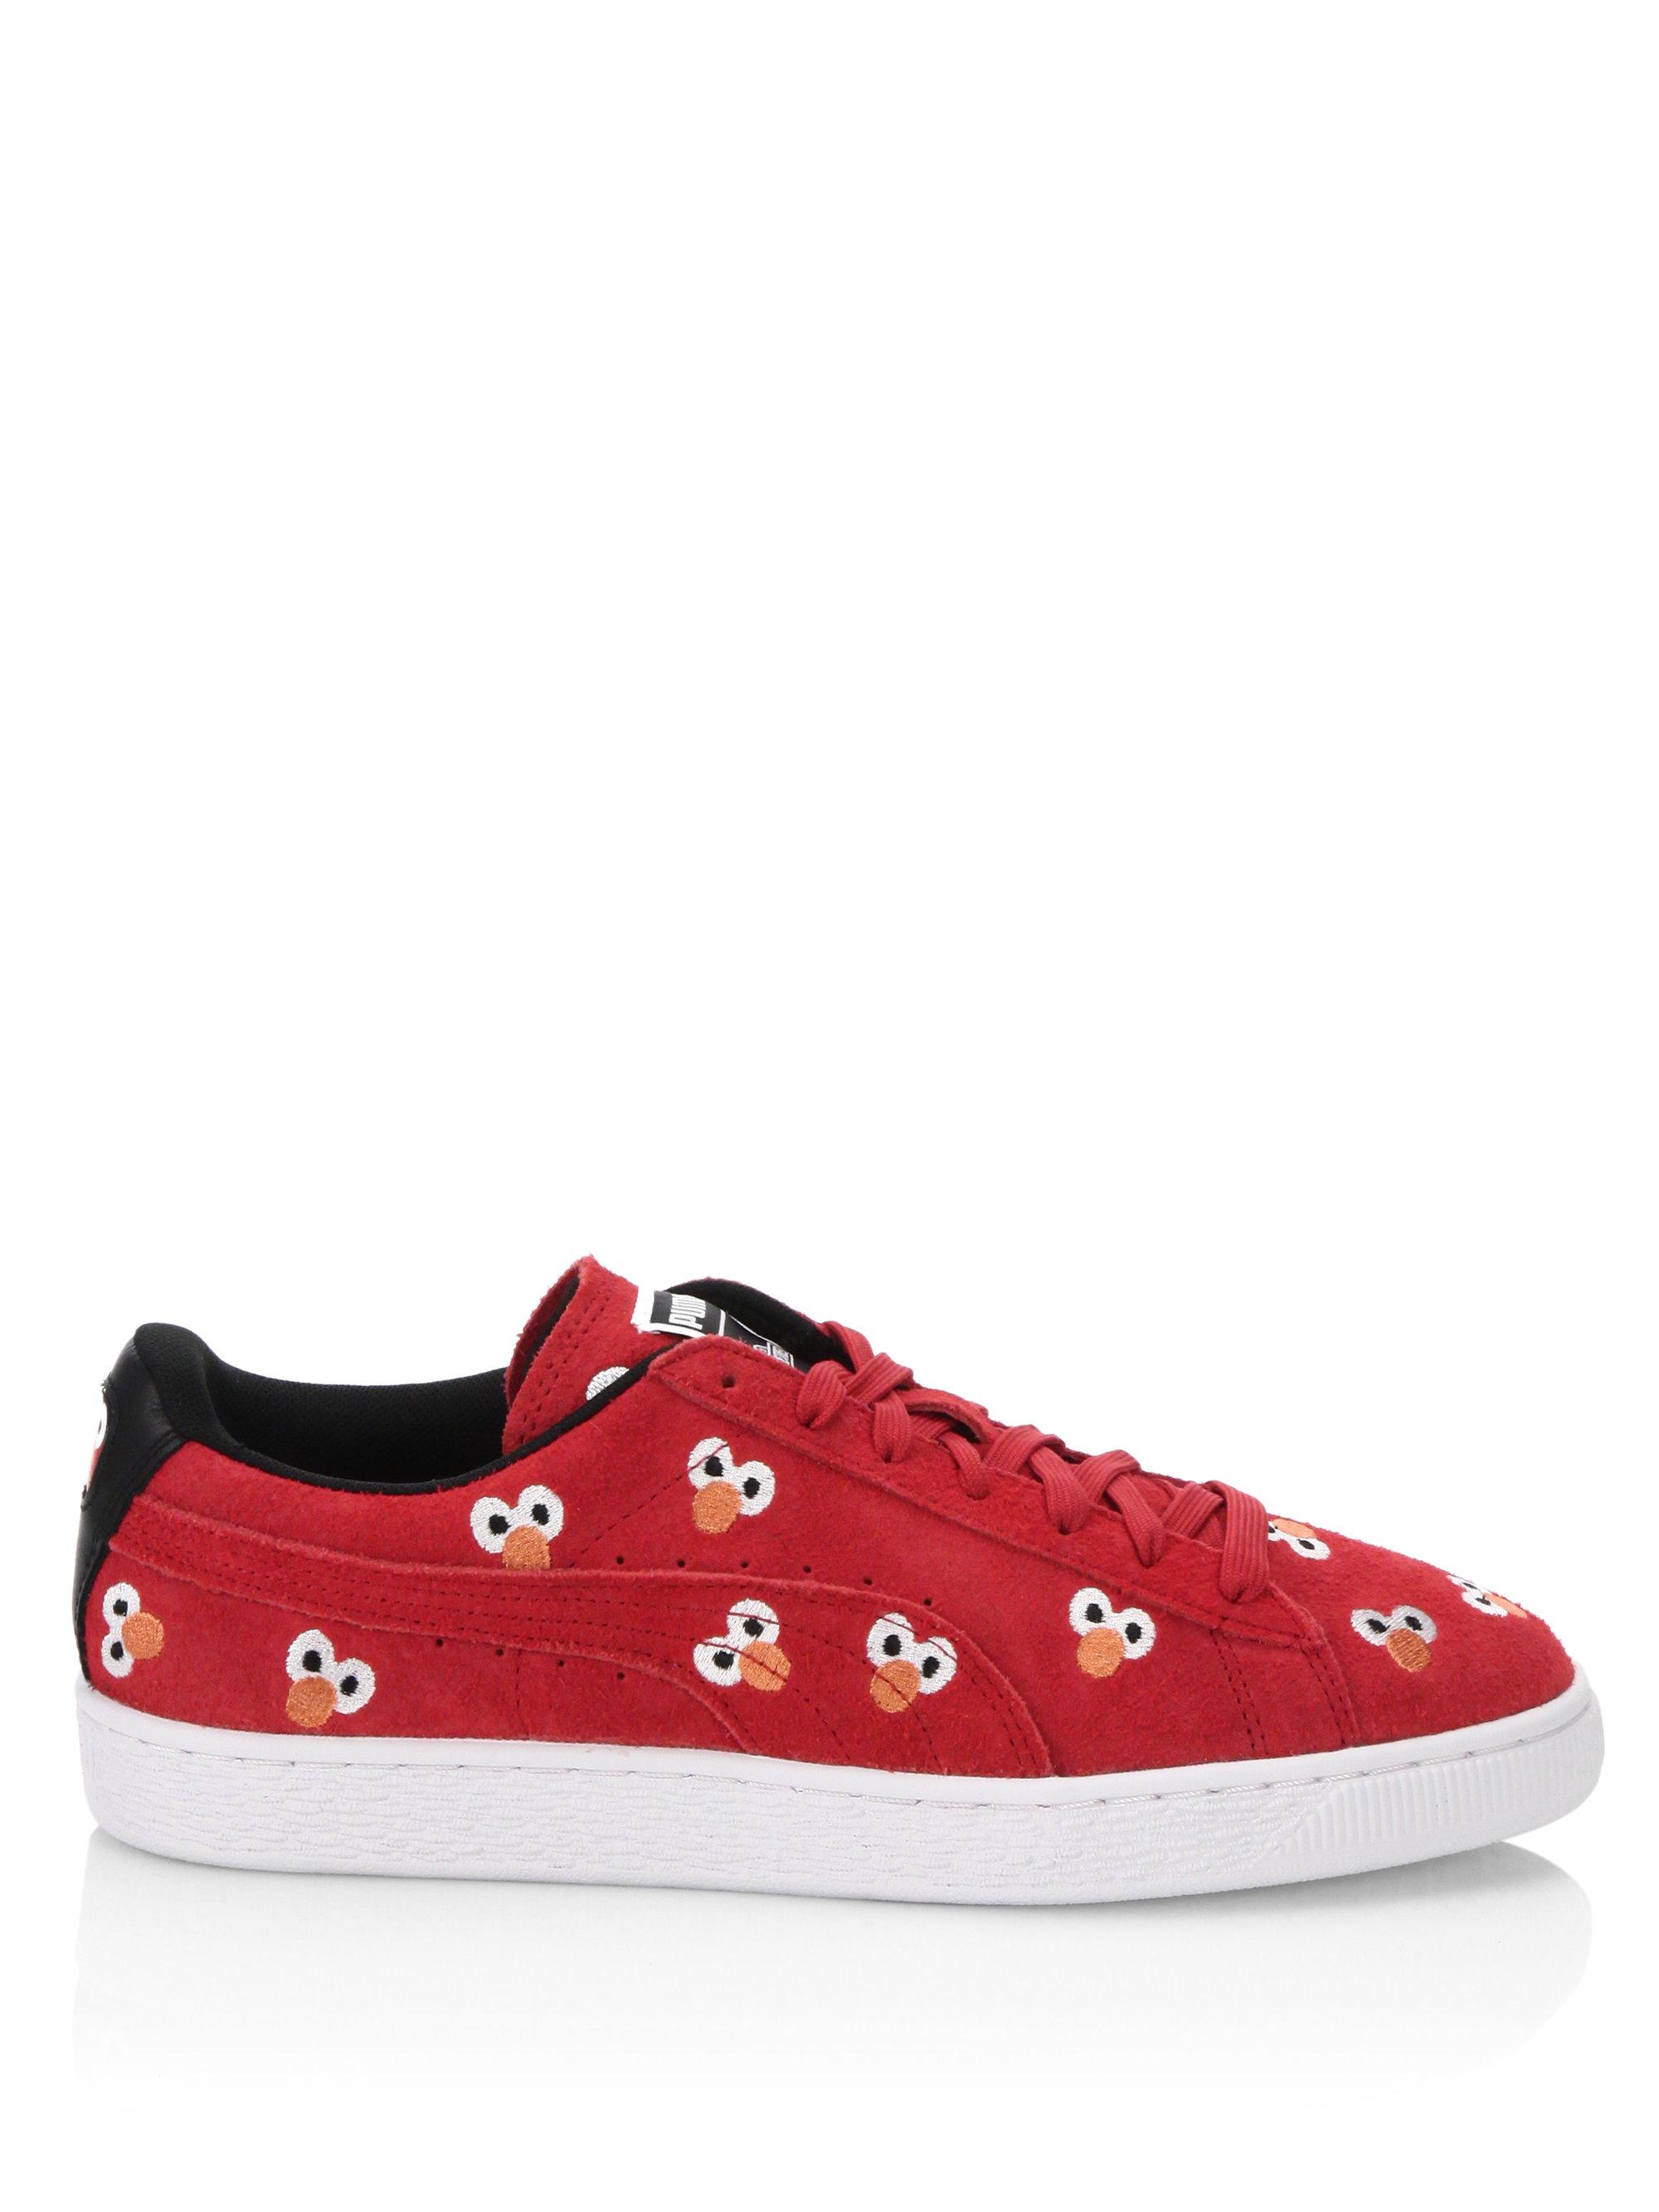 PUMA Sesame Street Elmo Lace-up Suede Sneakers in Red - Lyst